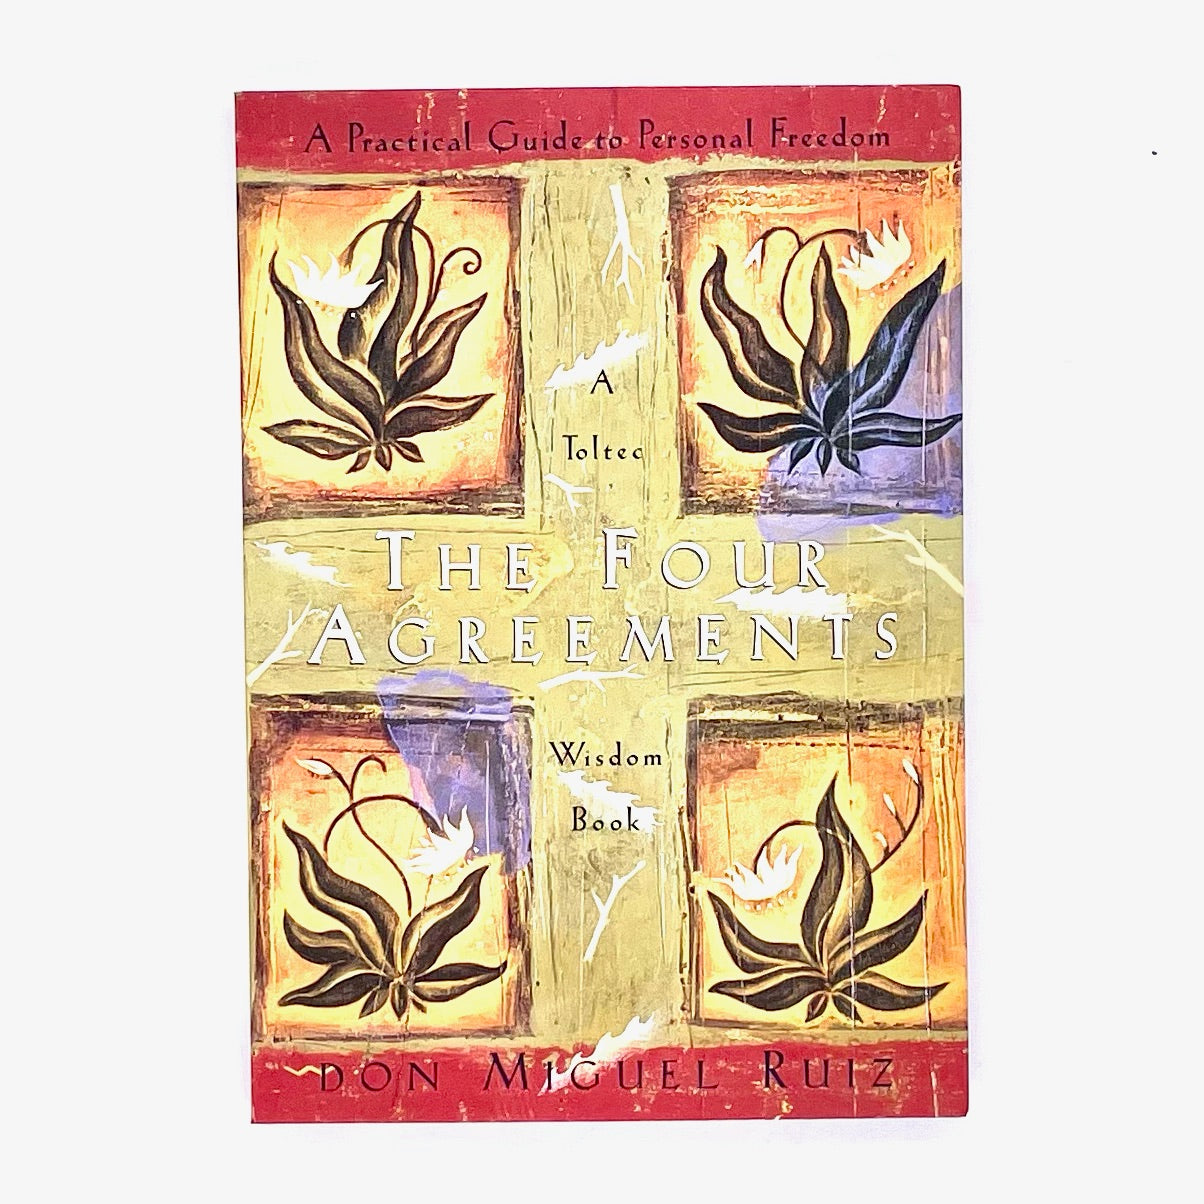 Book cover of The Four Agreements by Don Miguel Ruiz.